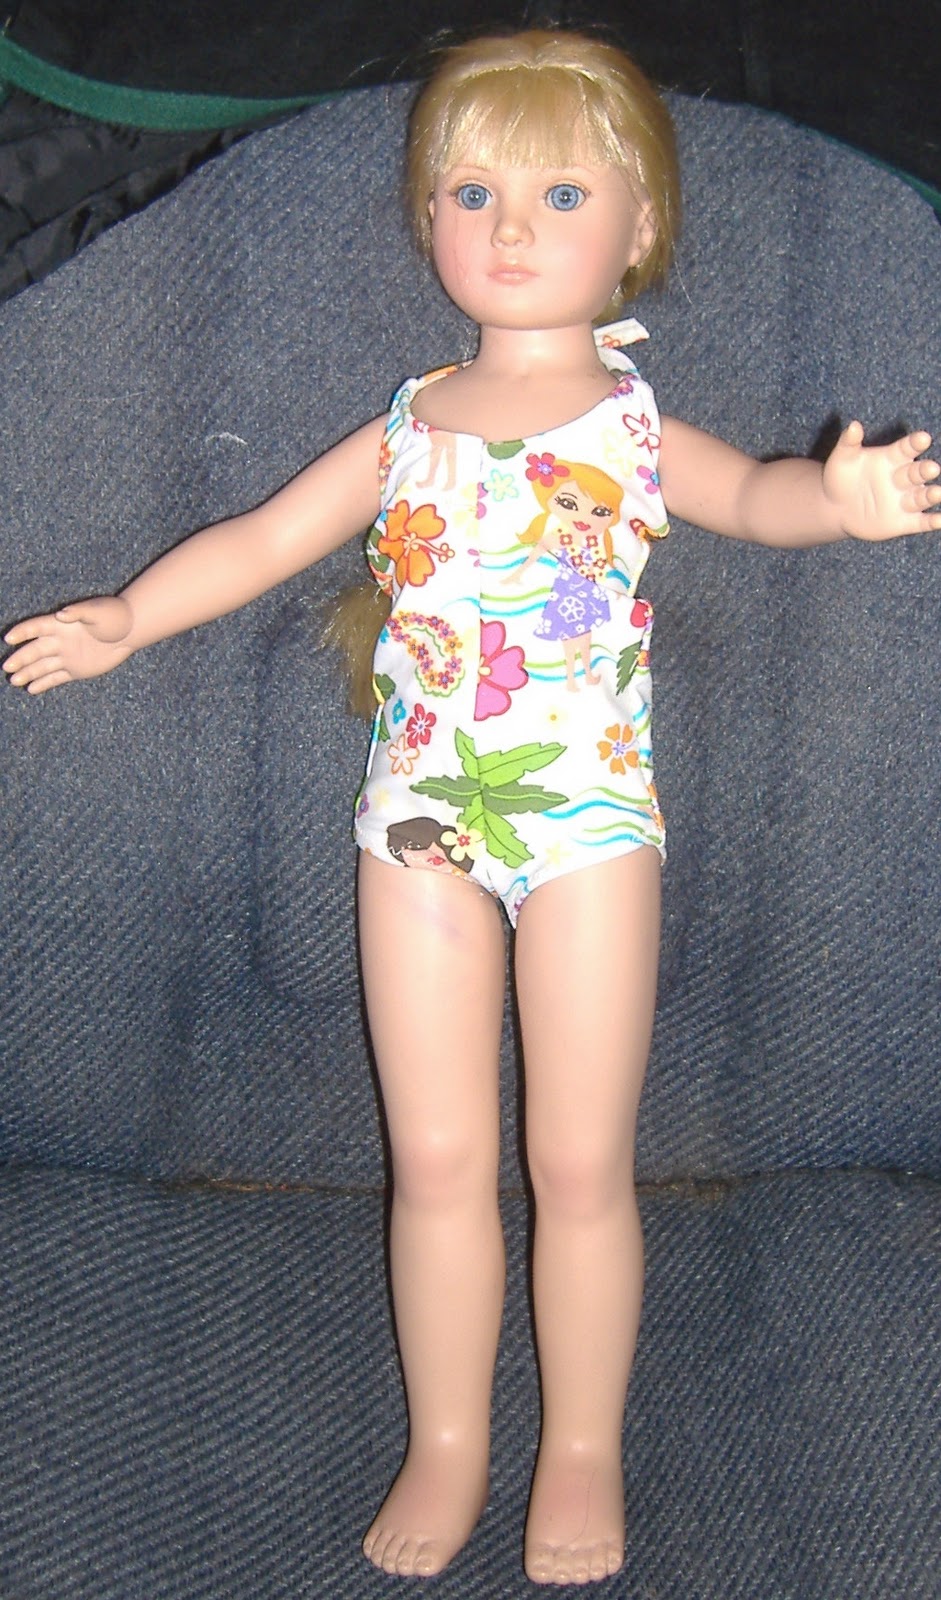 DollyFever: A Bathing Suit for Lorraine